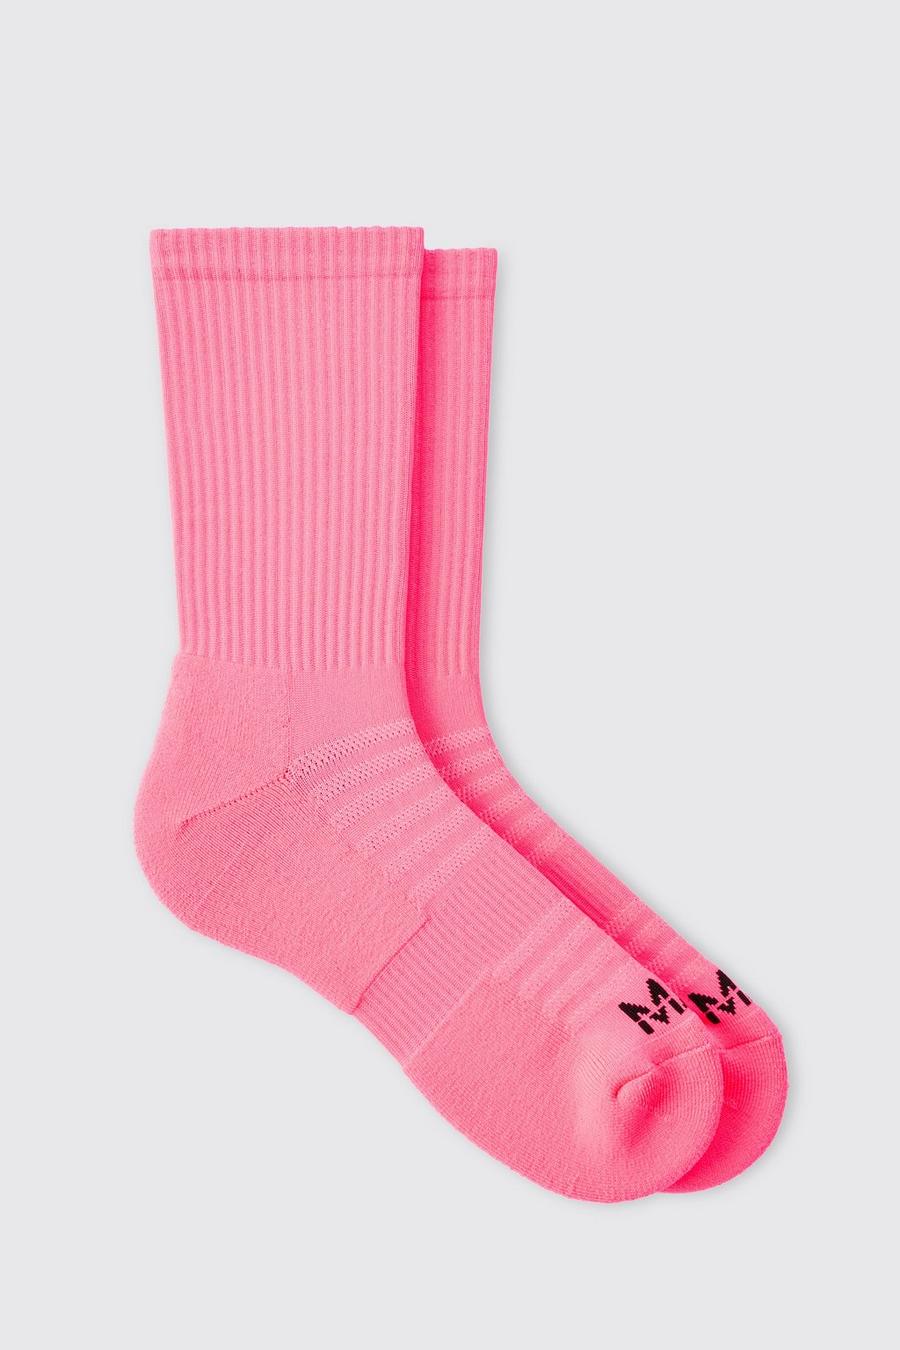 Calcetines MAN Active color fosforito para correr, Pink image number 1